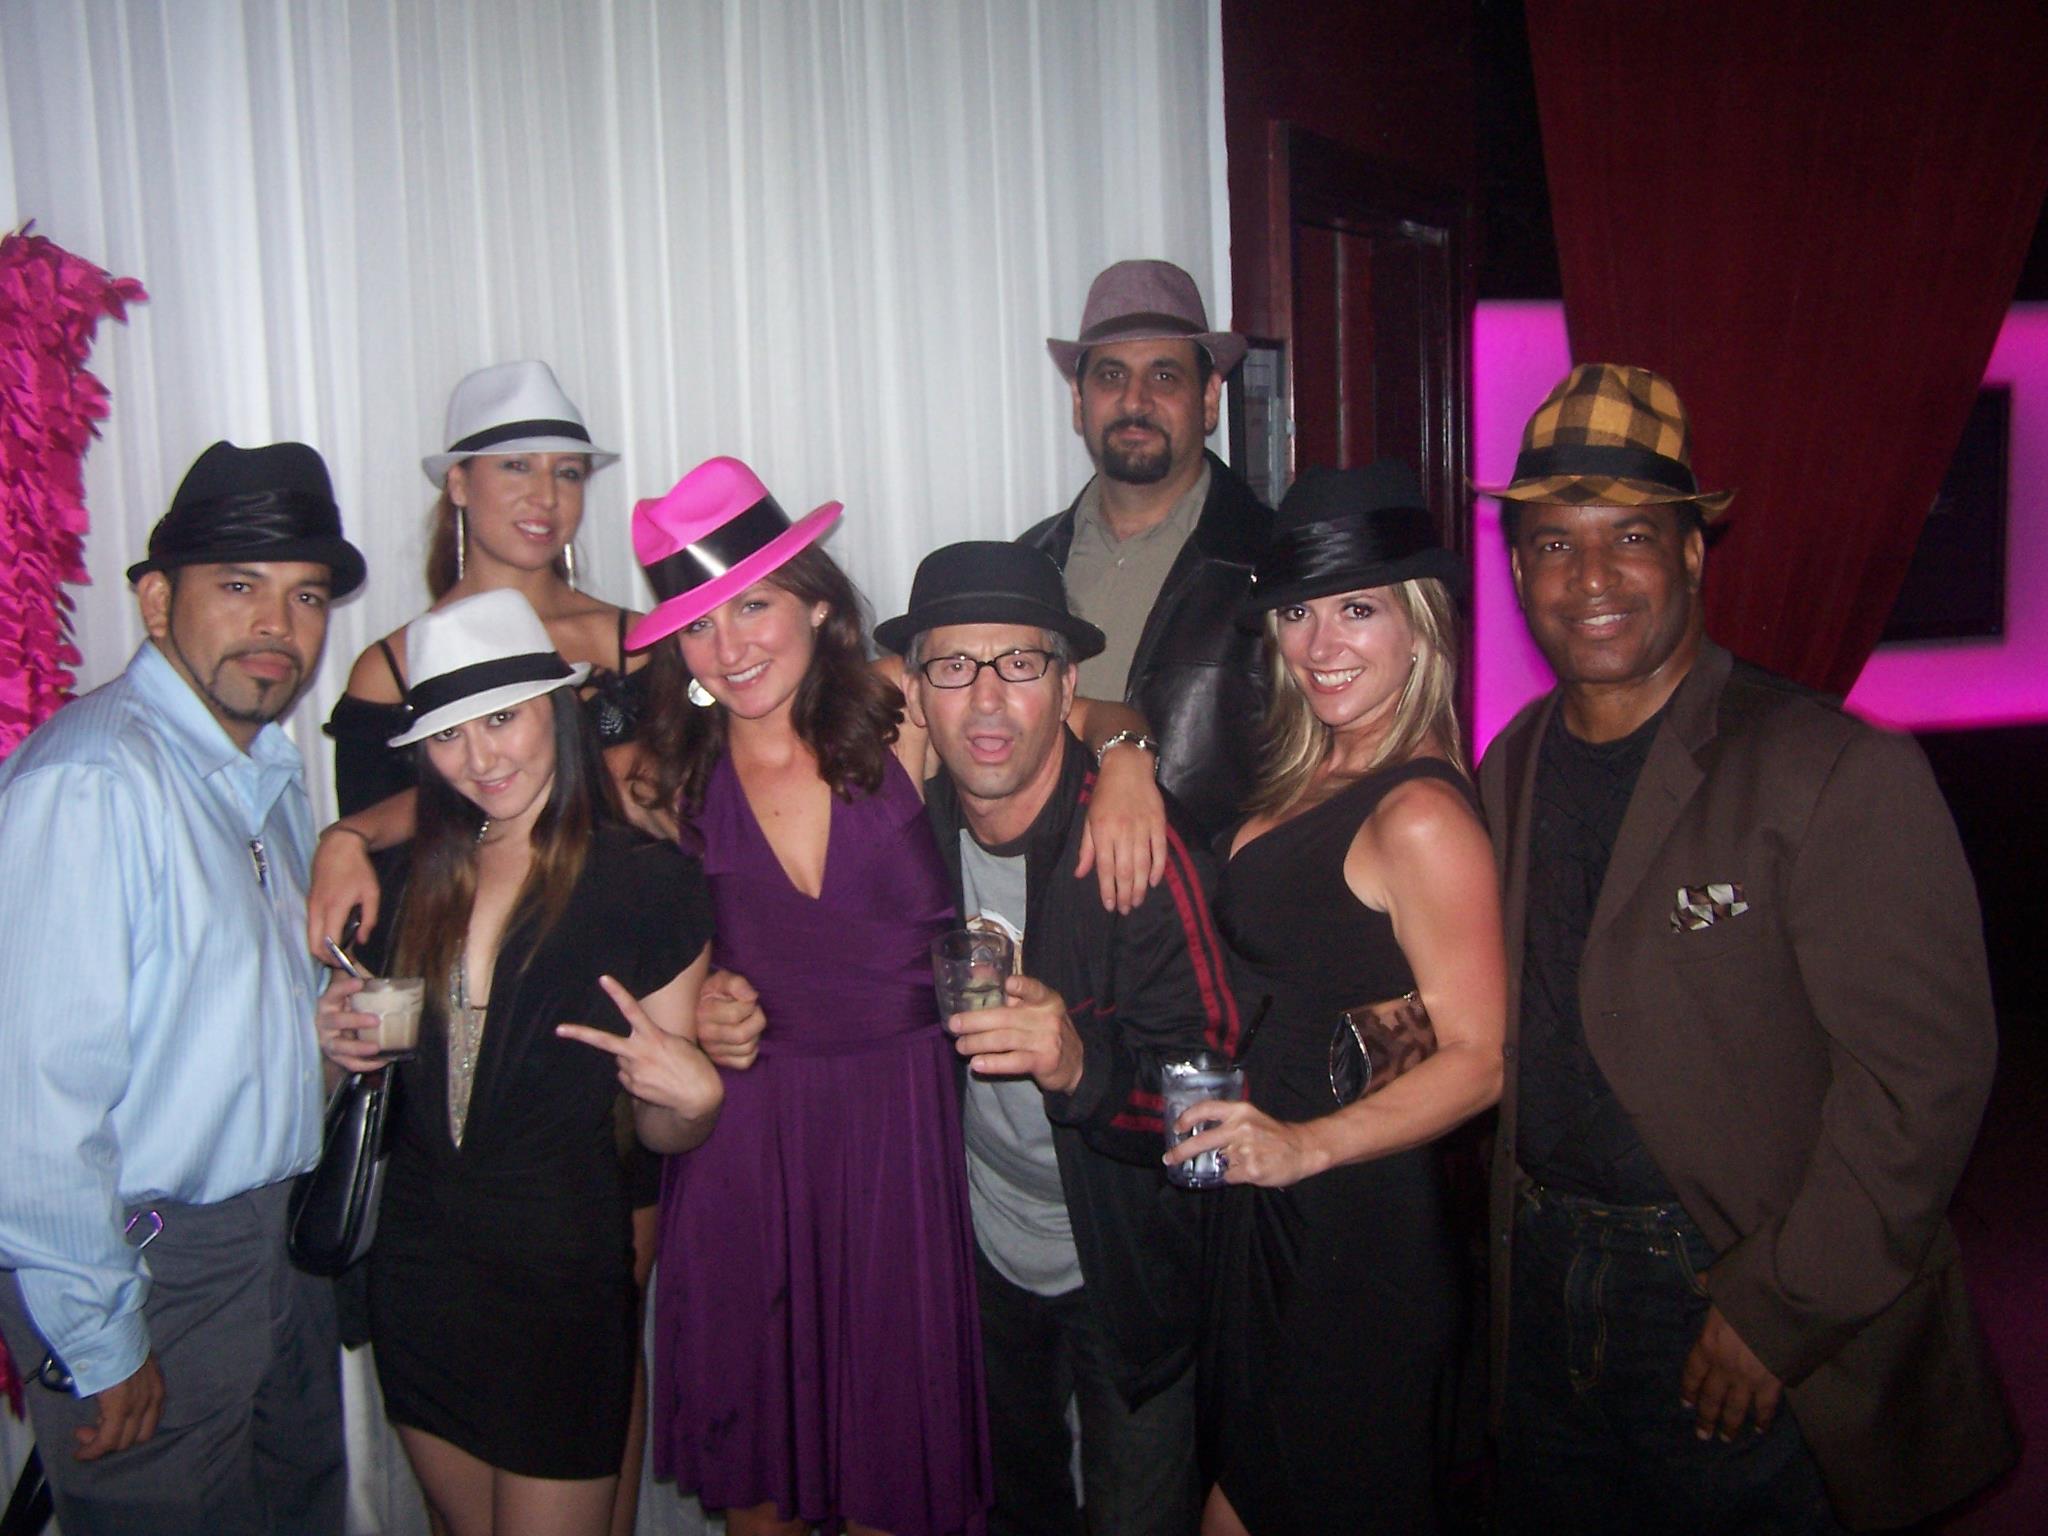 With wild & crazy friends at the 20th Annual Hat Extravaganza Party in Hollywood, CA on Sept 7, 2011.